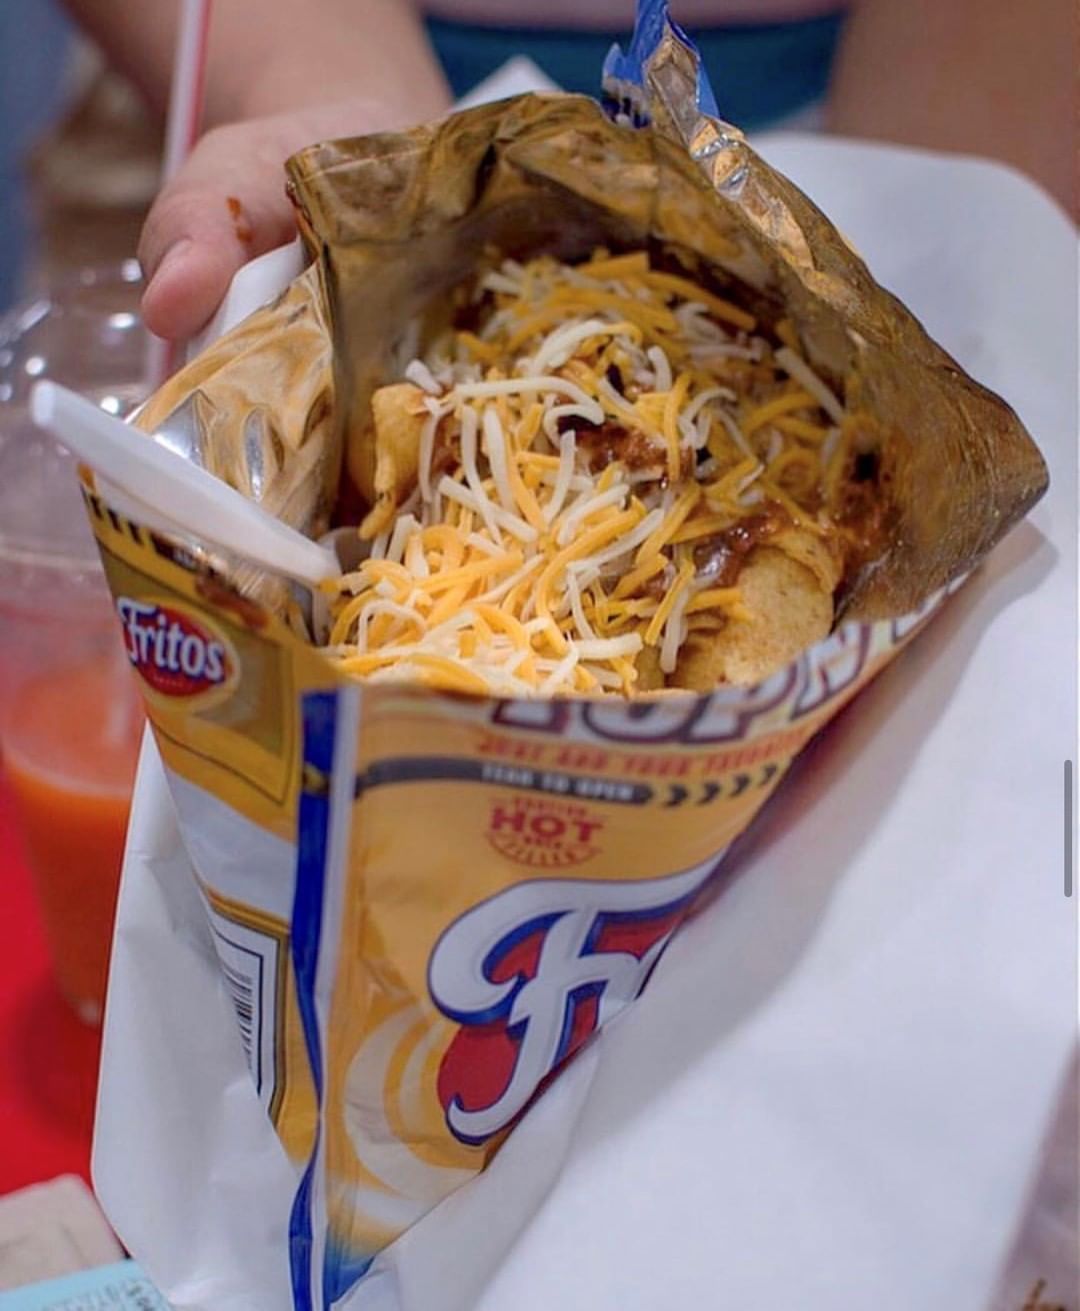 #FairFoodFriday coming to ya with an easy, delicious Texas-delight – Frito pie! Comment below what some of your family’s easy dinner ideas have been below. #BigTex #EasyDinnerIdea #repost